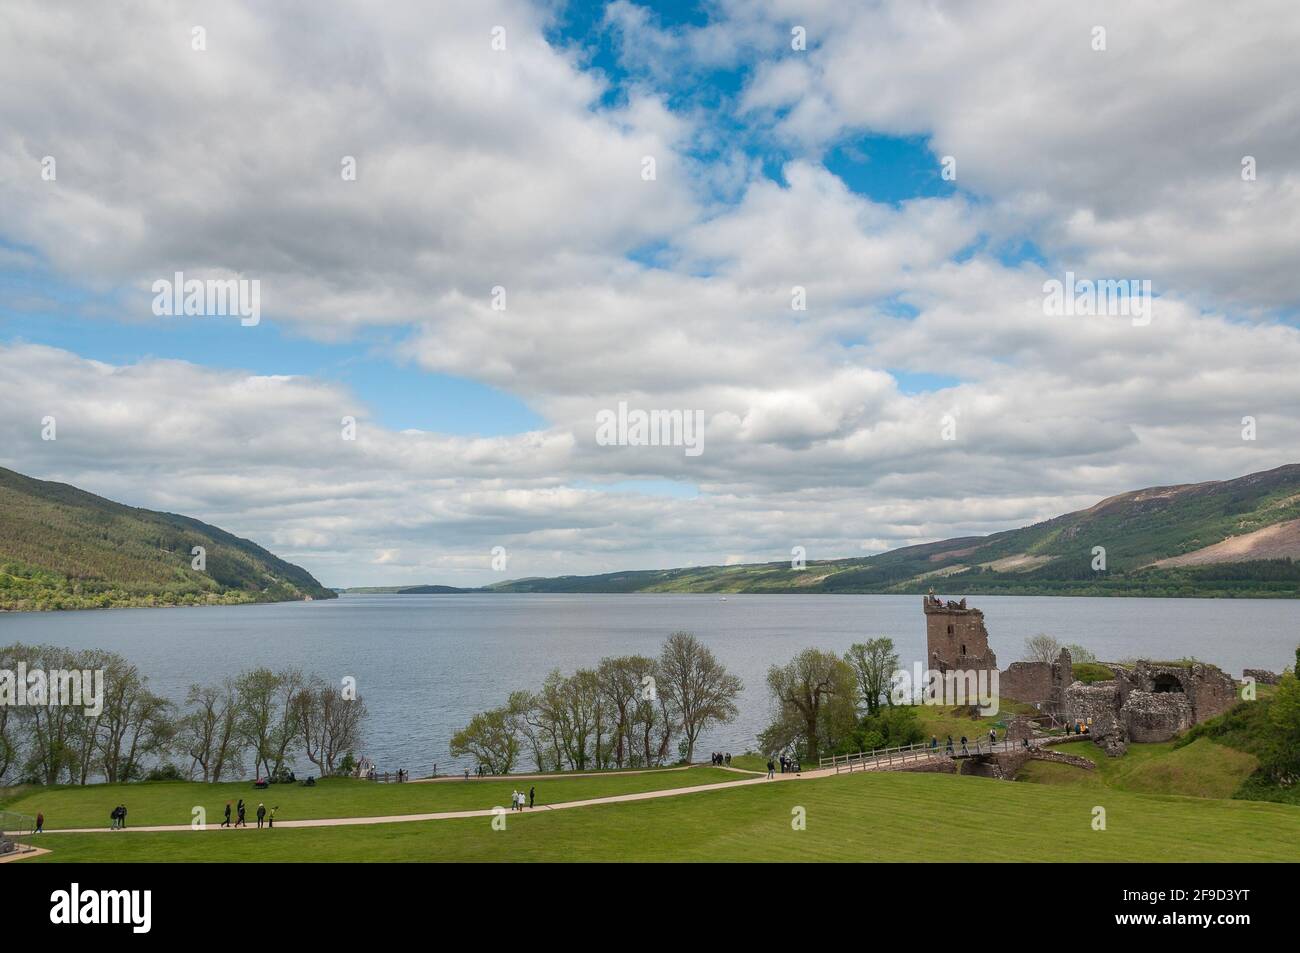 Panorama on Loch Ness and the ruins of Urquhart Castle. Concept: Scottish historic sites, archaeological sites, legendary Scottish places Stock Photo